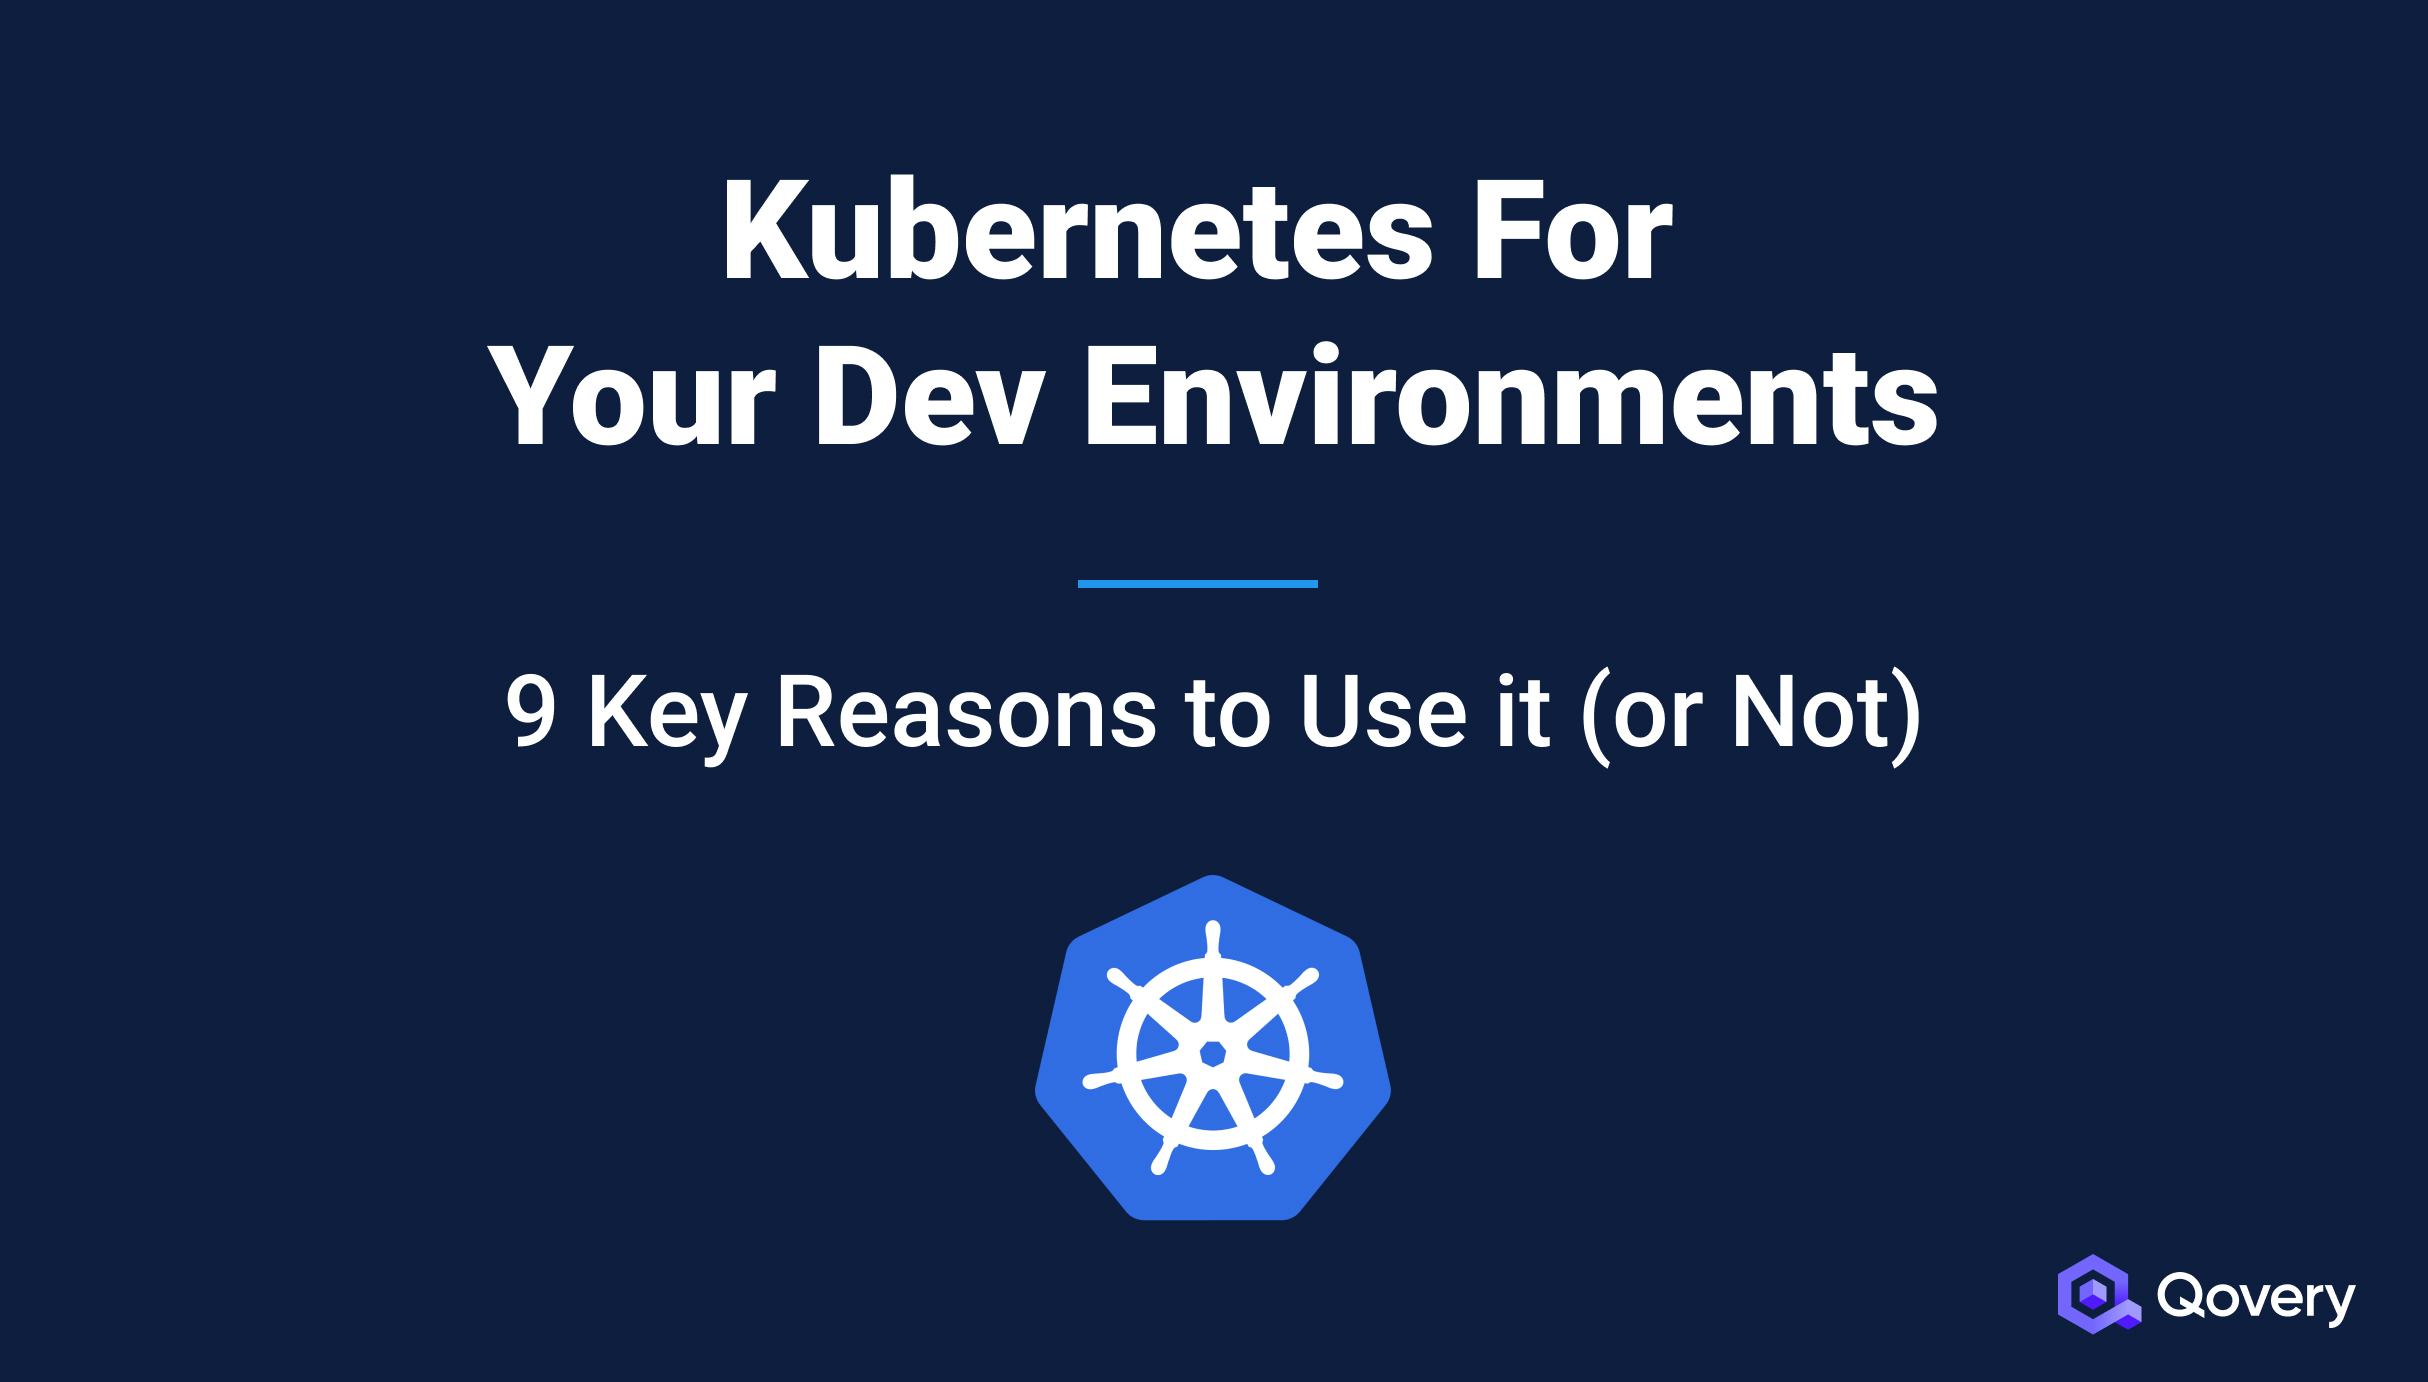 9 Key Reasons to Use or Not Kubernetes for Your Dev Environments - Qovery